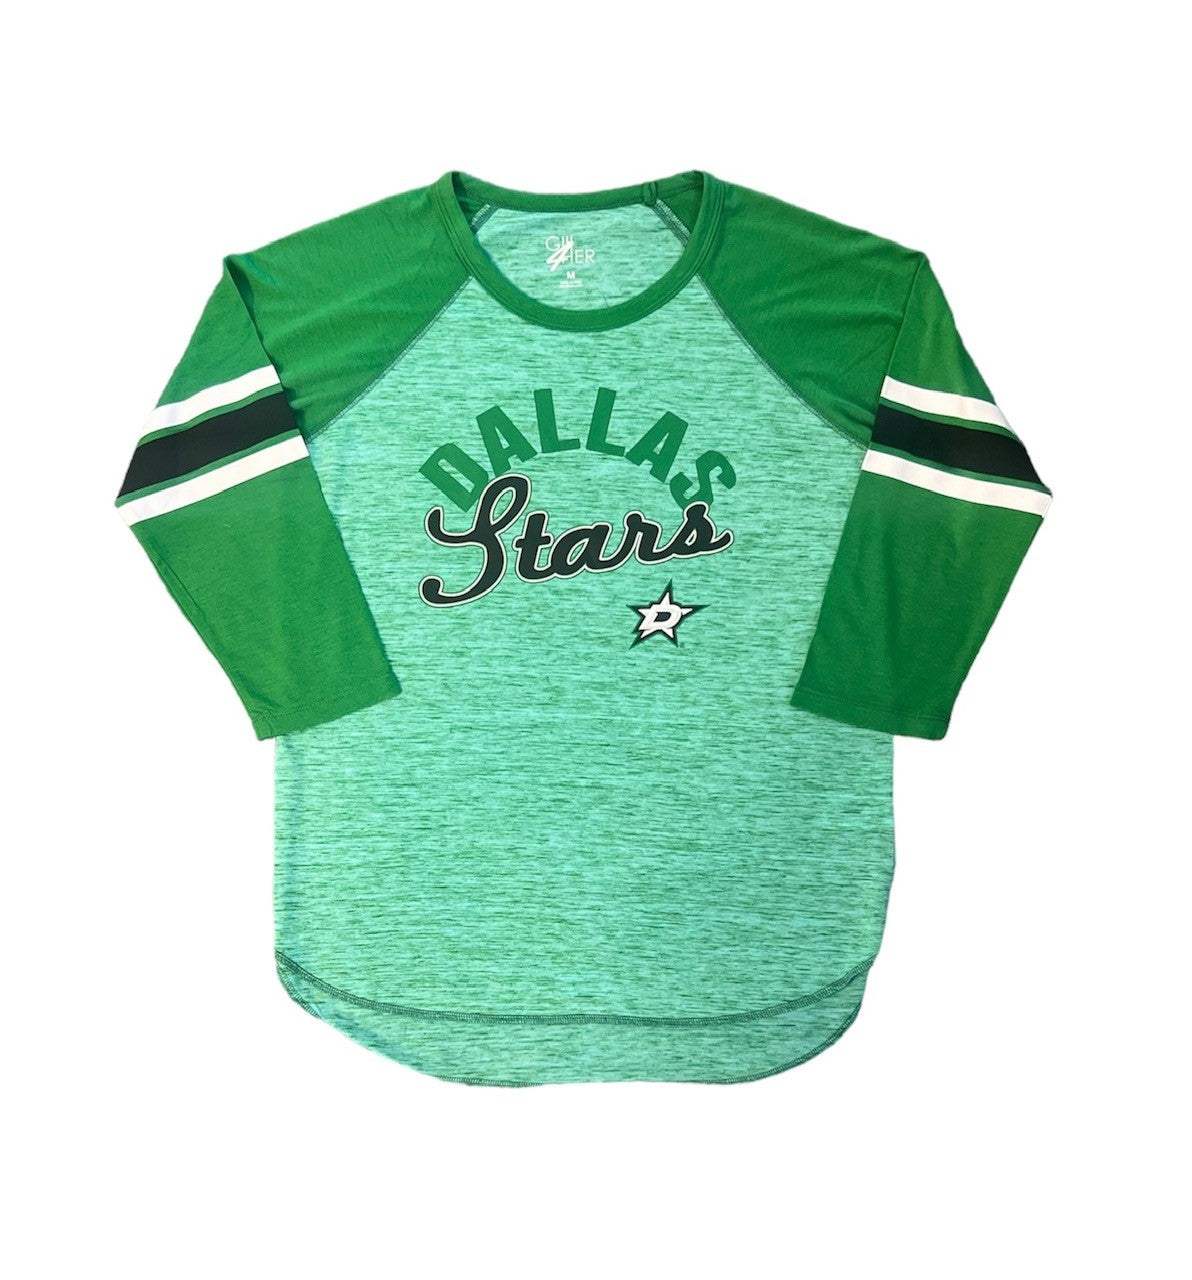 DALLAS STARS WOMEN'S G-III FOR HER 3/4 SLEEVE - FRONT VIEW